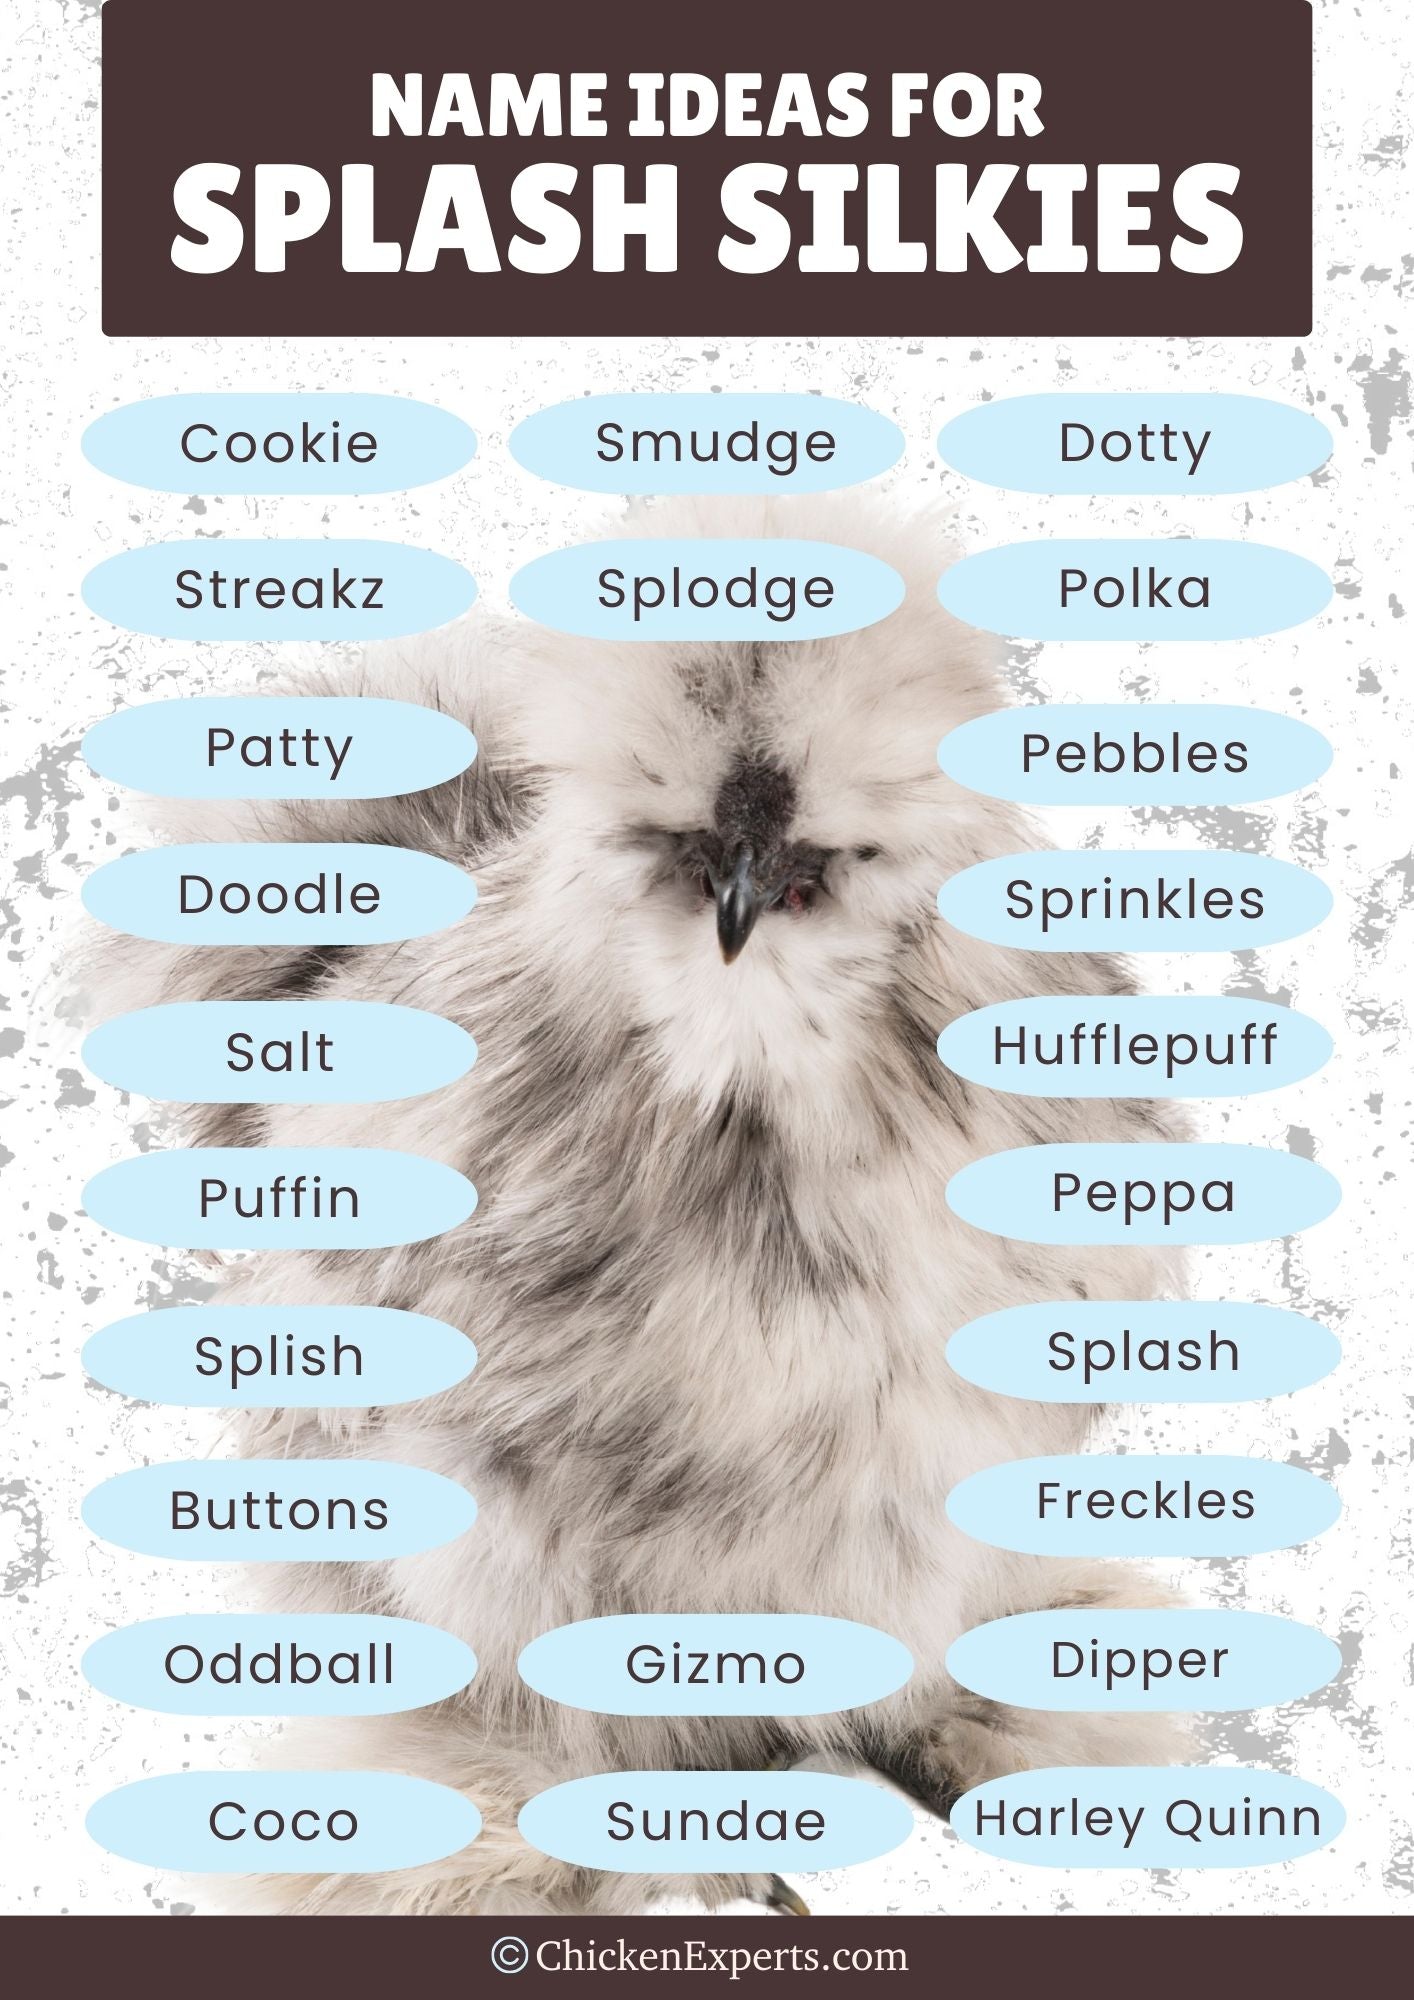 name ideas for splash silkie chickens